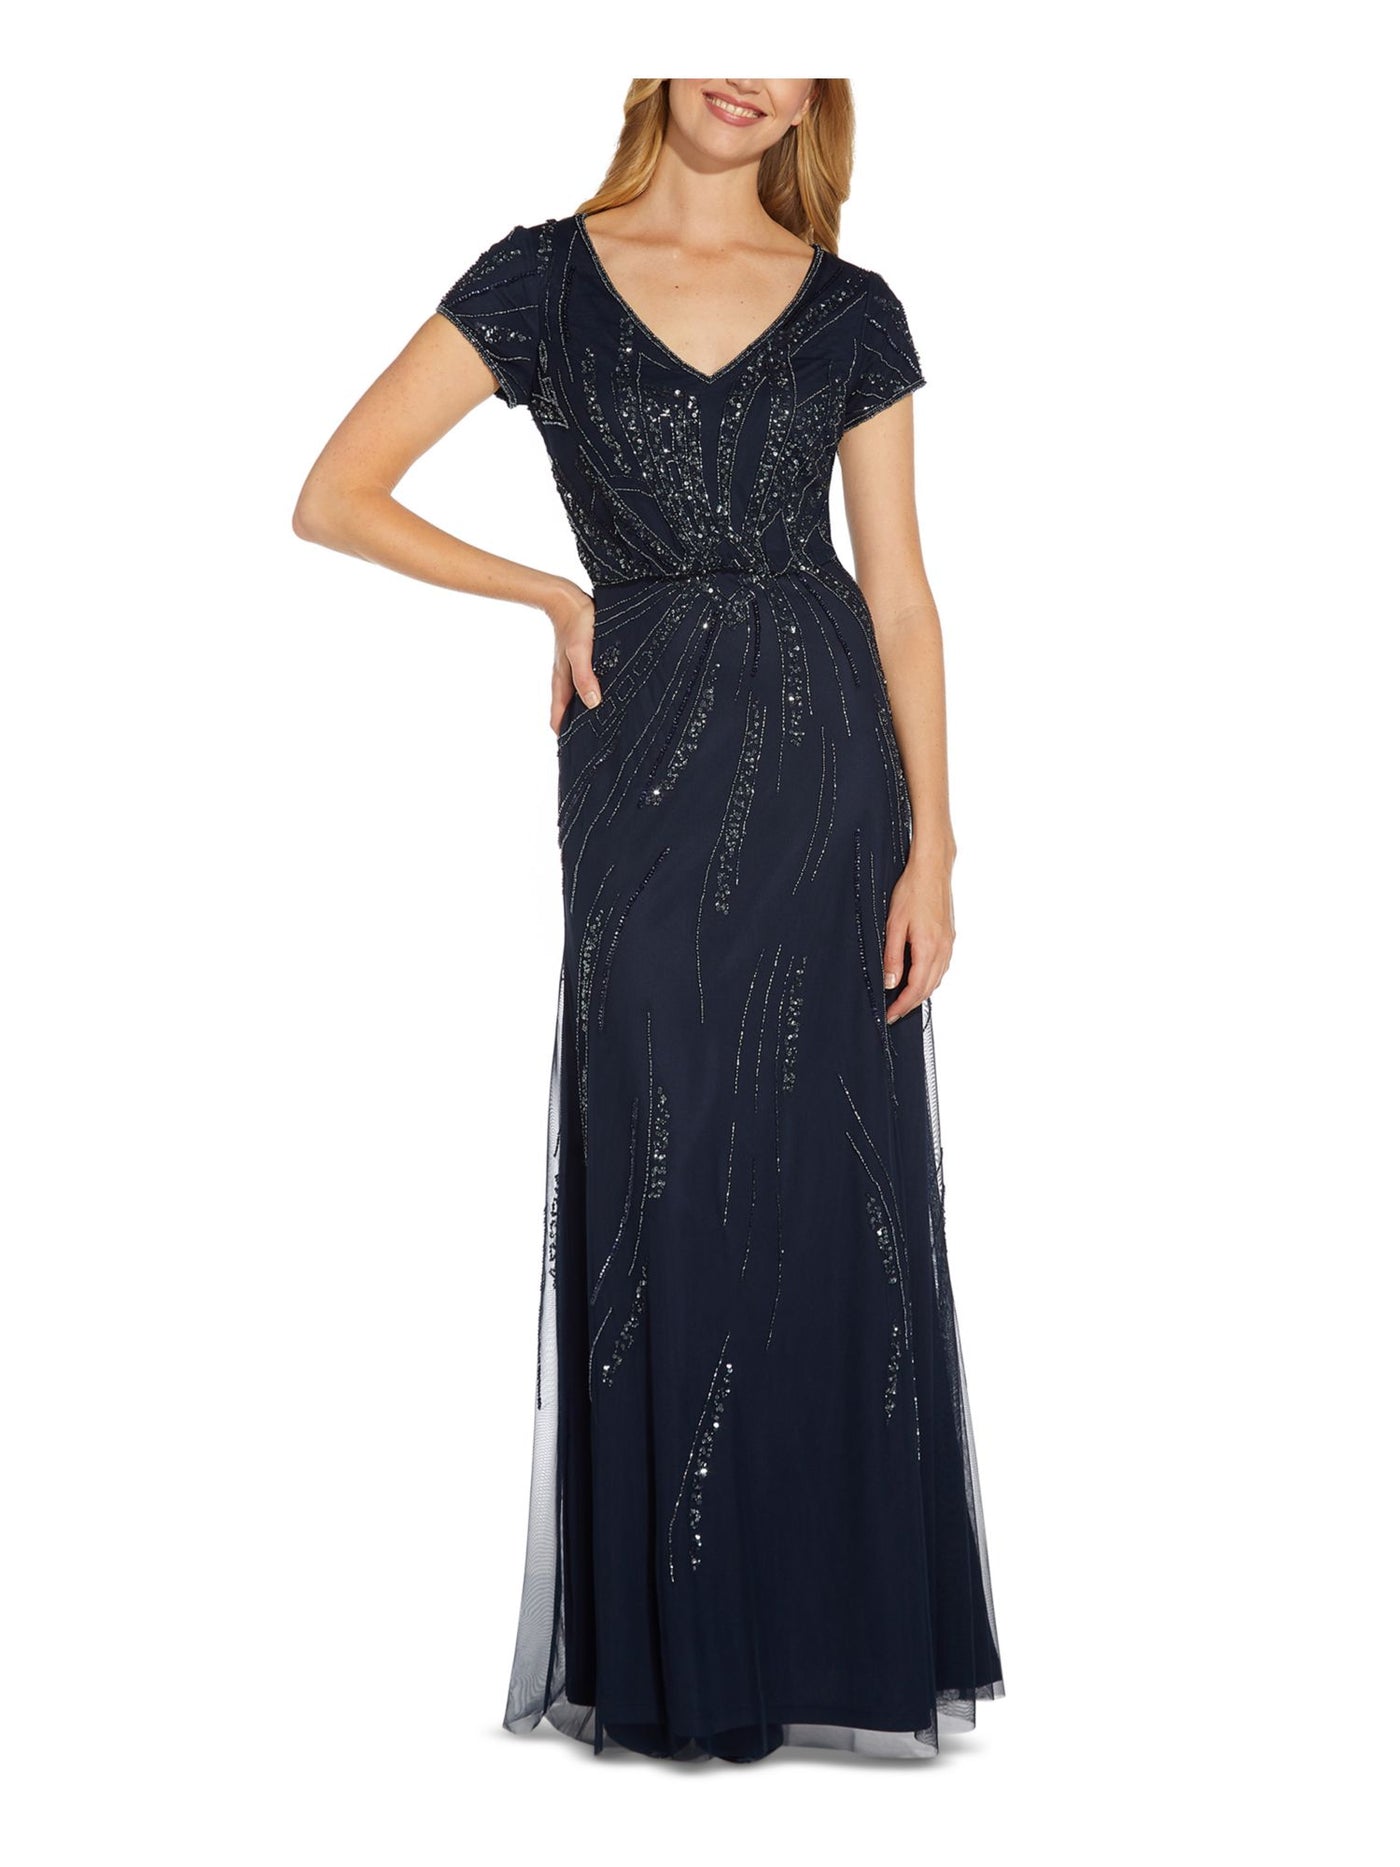 ADRIANNA PAPELL Womens Navy Embellished Zippered Lined Short Sleeve V Neck Full-Length Formal Gown Dress 4